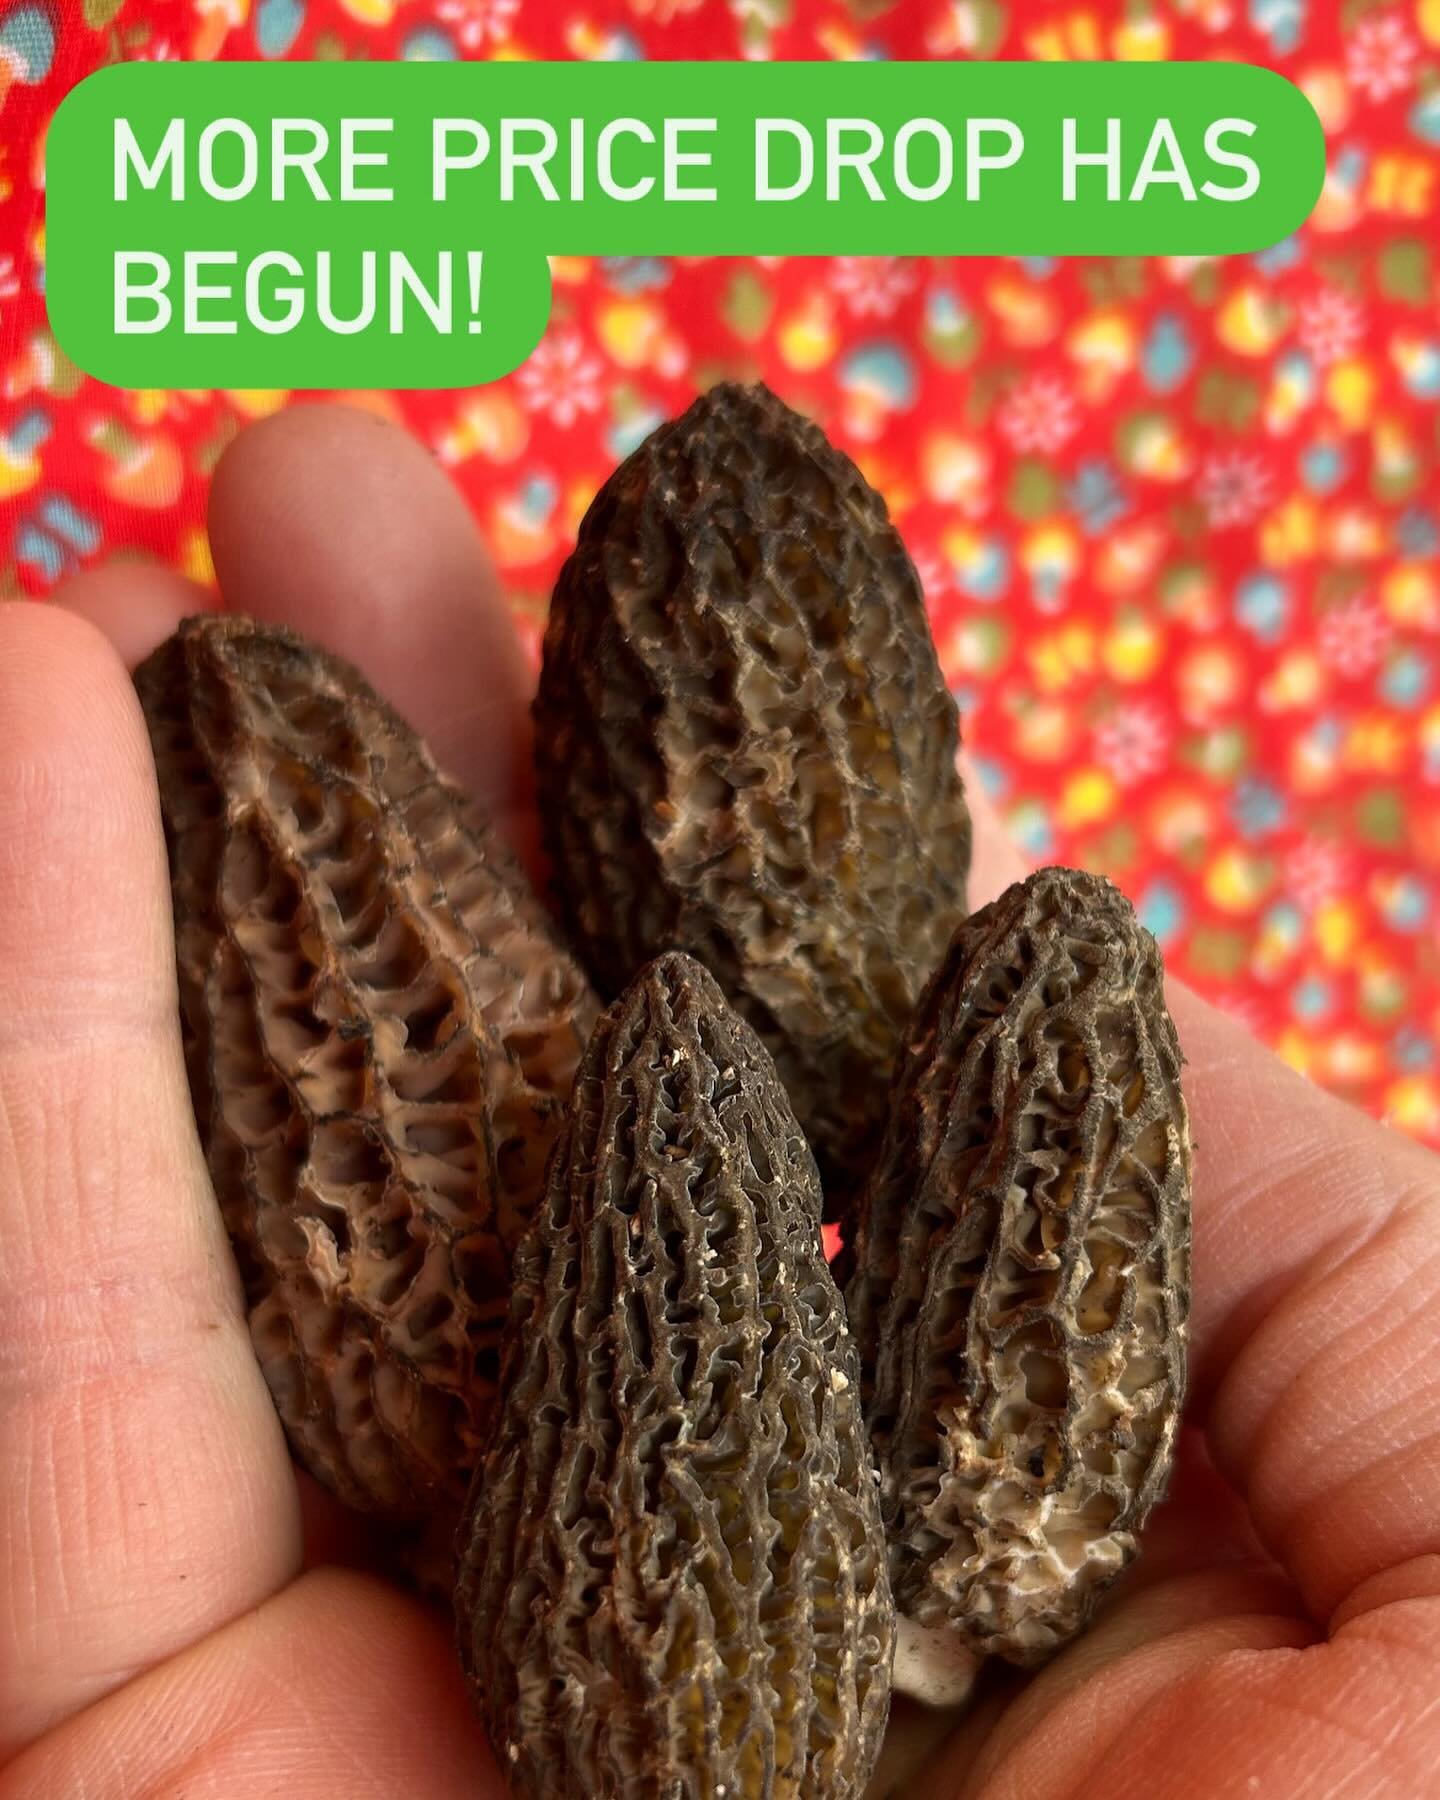 Suppose to say &ldquo;MOREL&rdquo; price drop has begun
.
Other weekend funs and goodies- lots of greens/wild onions/green garlic etc
.
Not to mention OF COURSE MORELS- now $15/quarter pound (for burns)- PLENTY FOR THE WEEKEND- I don&rsquo;t think we